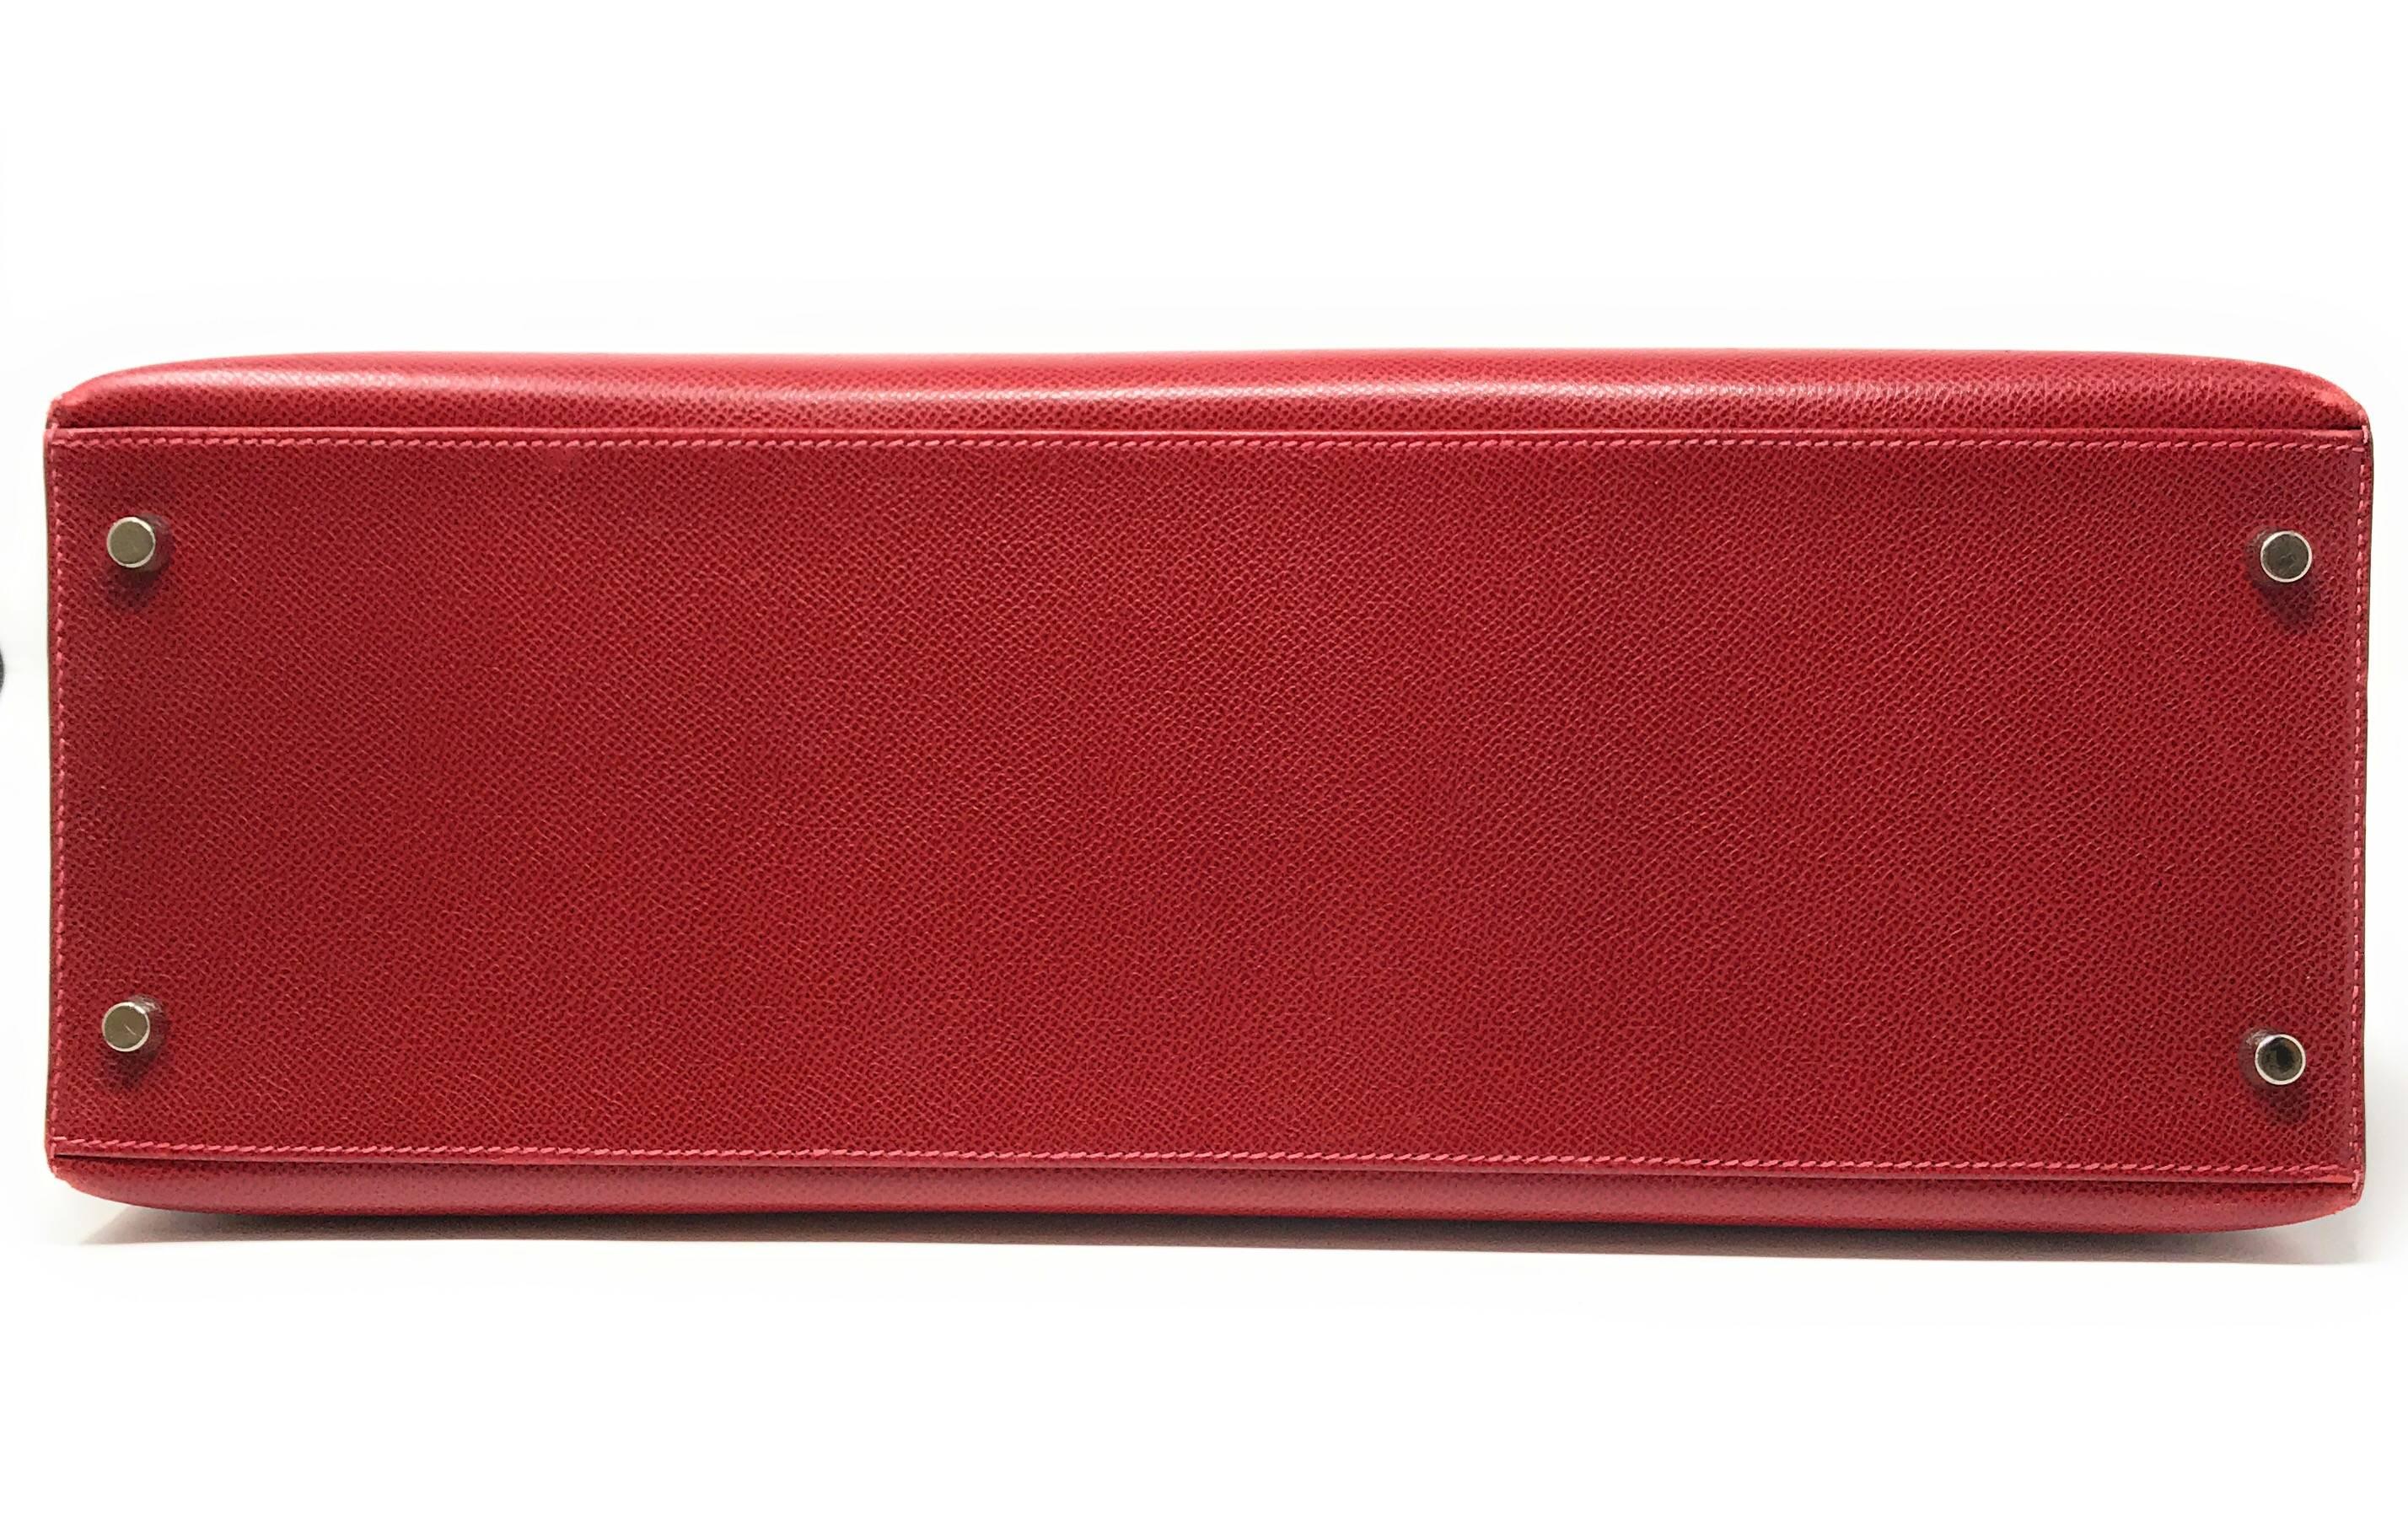 Hermes Kelly 40cm Red Bufflao Leather Bag For Sale 2